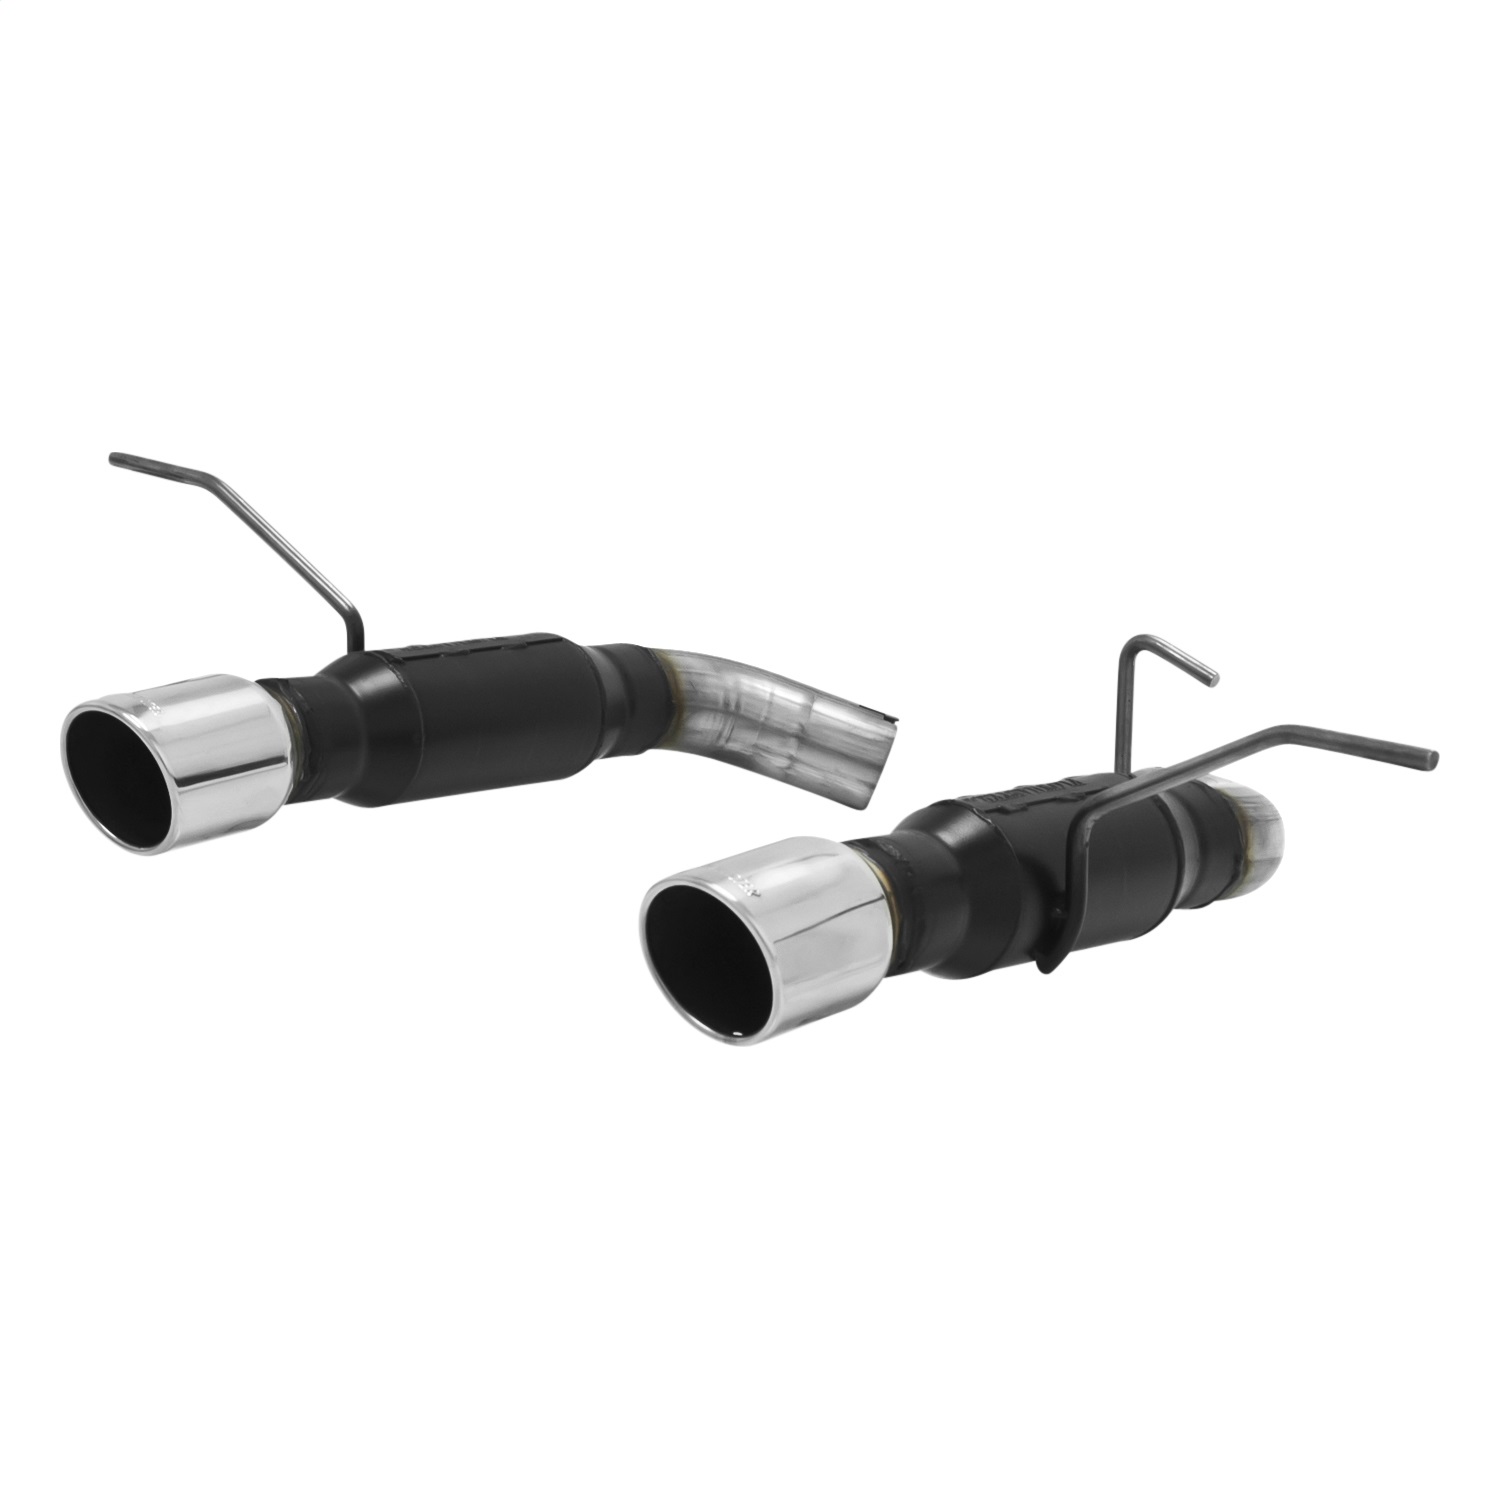 Flowmaster Flowmaster 817600 Force II Axle Back Exhaust System Fits Grand Cherokee (WK2)